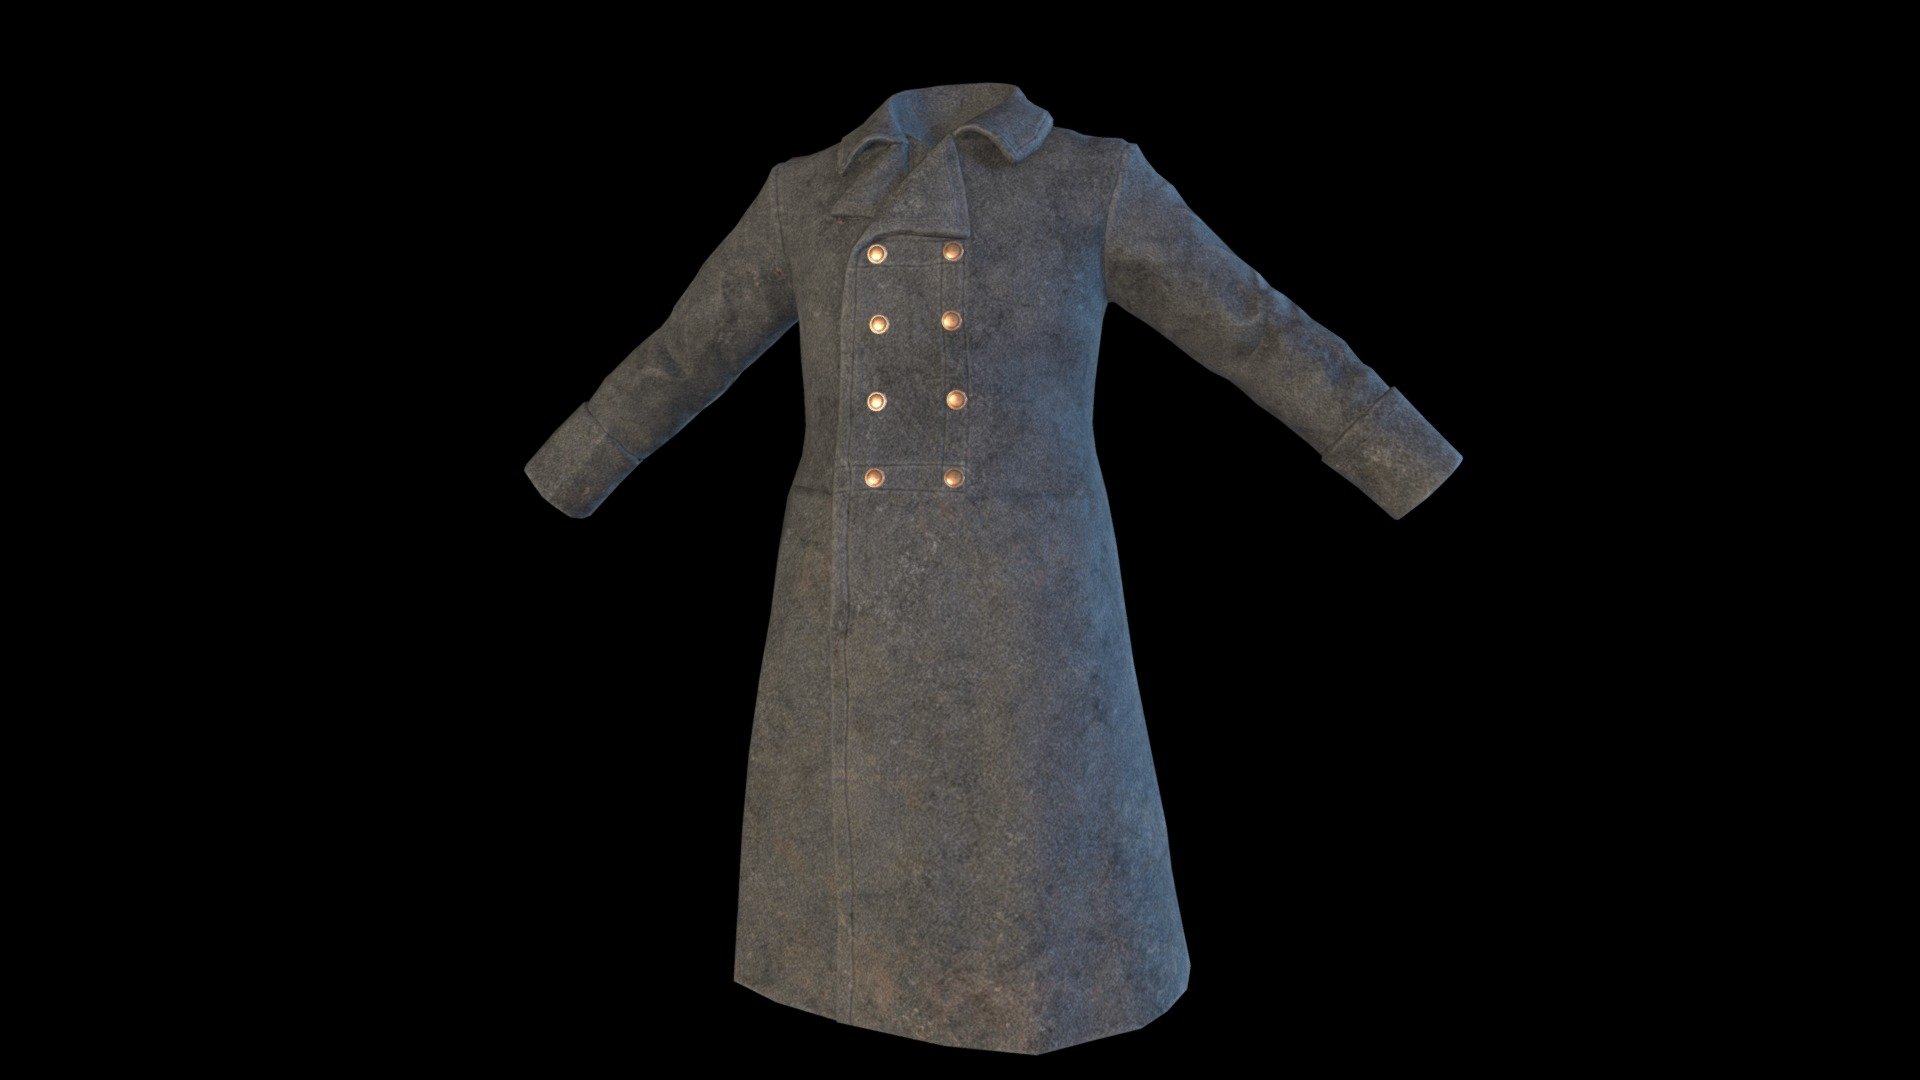 Wool Greatcoat game ready model, originally made to be implemented as a mod for DayZ.

Comes with two extra diffuse textures: Olive and Navy blue 3d model